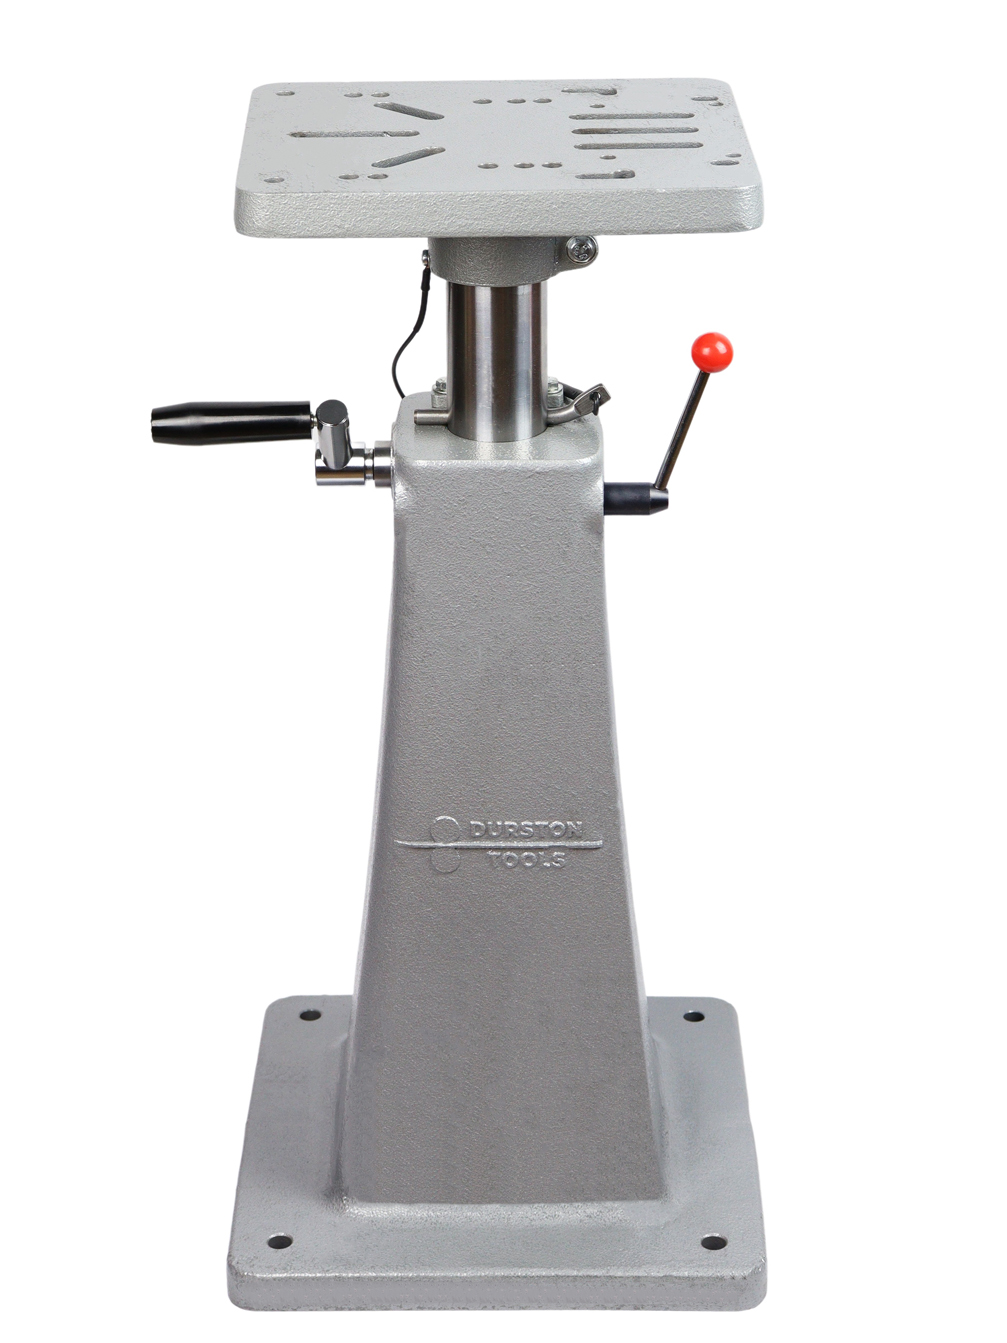 Adjustable stand for Durston rolling mills